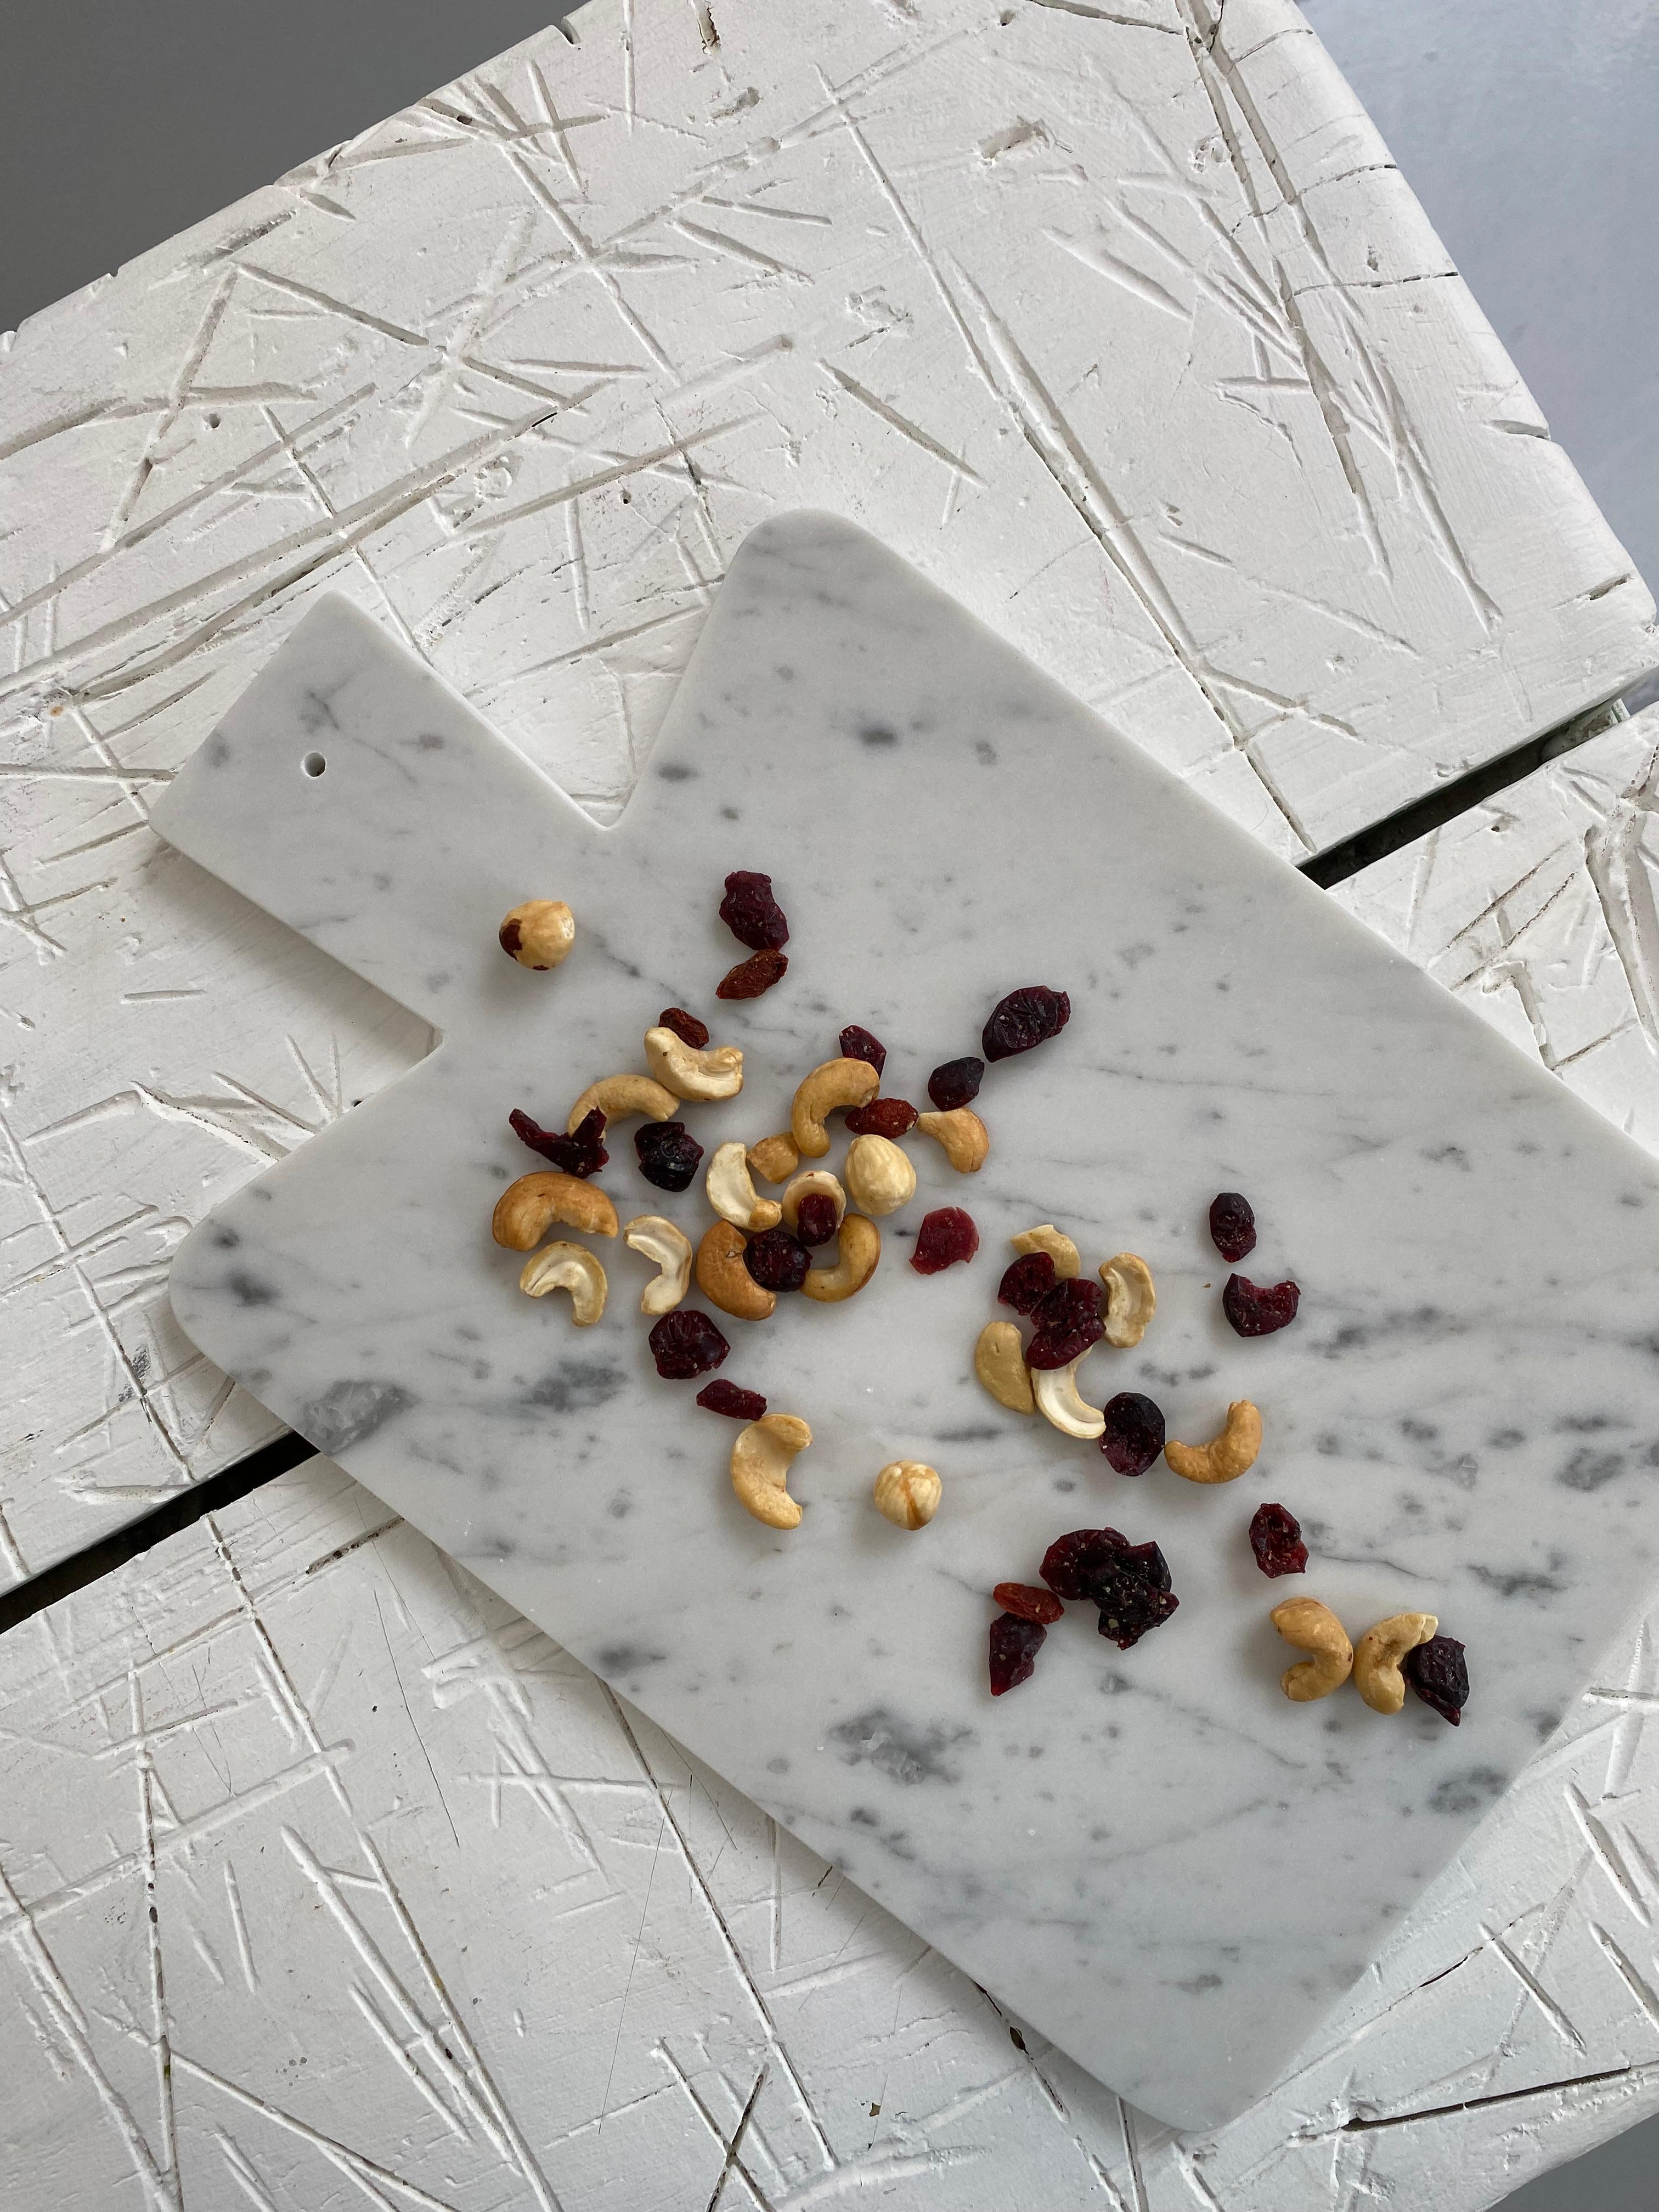 White Carrara marble cutting board and hole on the handle to hang it. Each piece is in a way unique (every marble block is different in veins and shades) and handmade by Italian artisans specialized over generations in processing marble. Slight